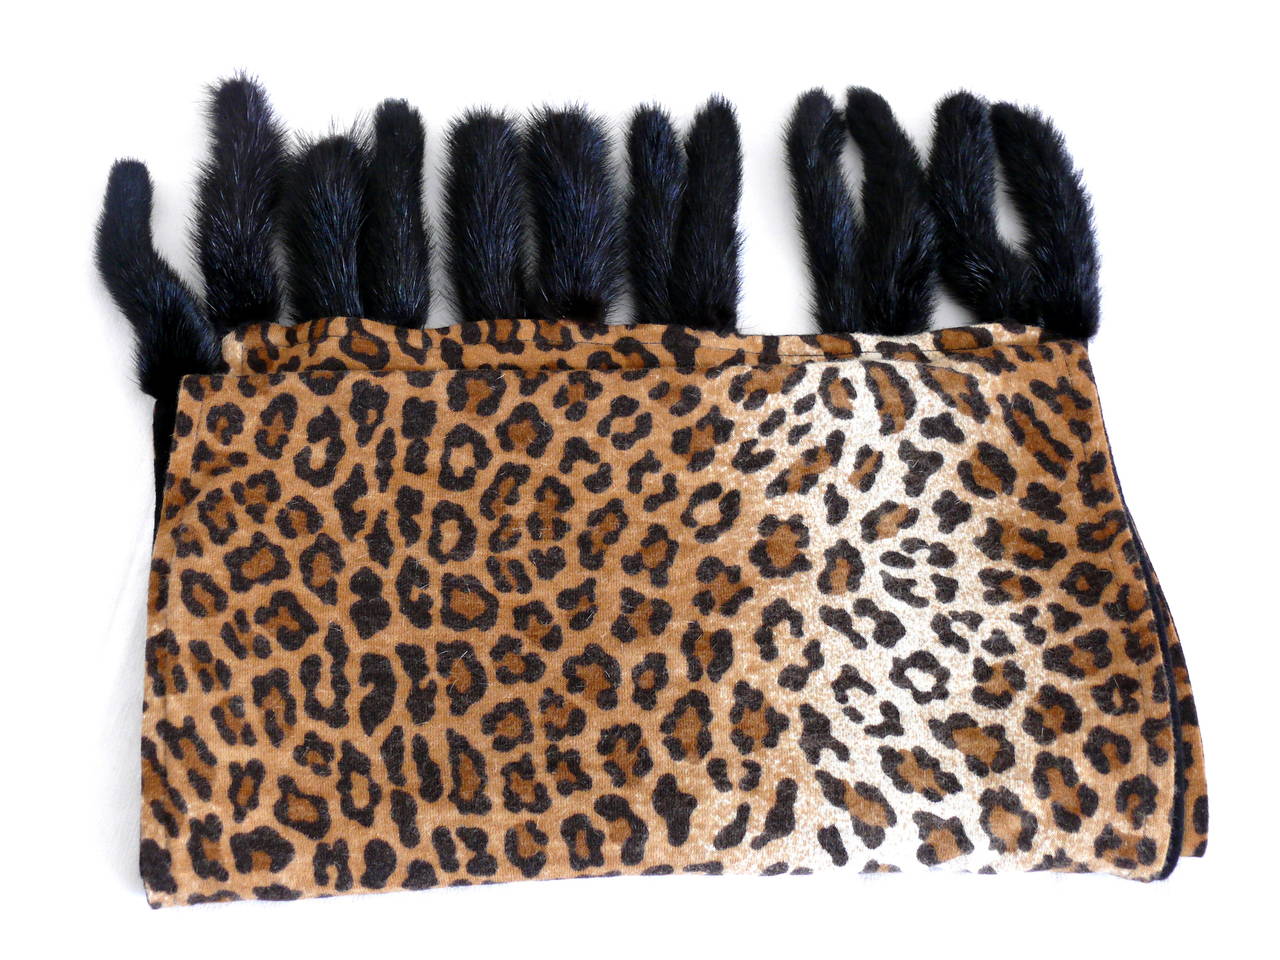 ISADORA Paris gorgeous faux leopard print stole with black fur tails on both ends.

Label reads IDADORA Paris.

Composition tag reads : 50 % Wool / 30 % Polyamide / 20 % Angora.

Indicative measurements : total length approx. 188 cm (74.02